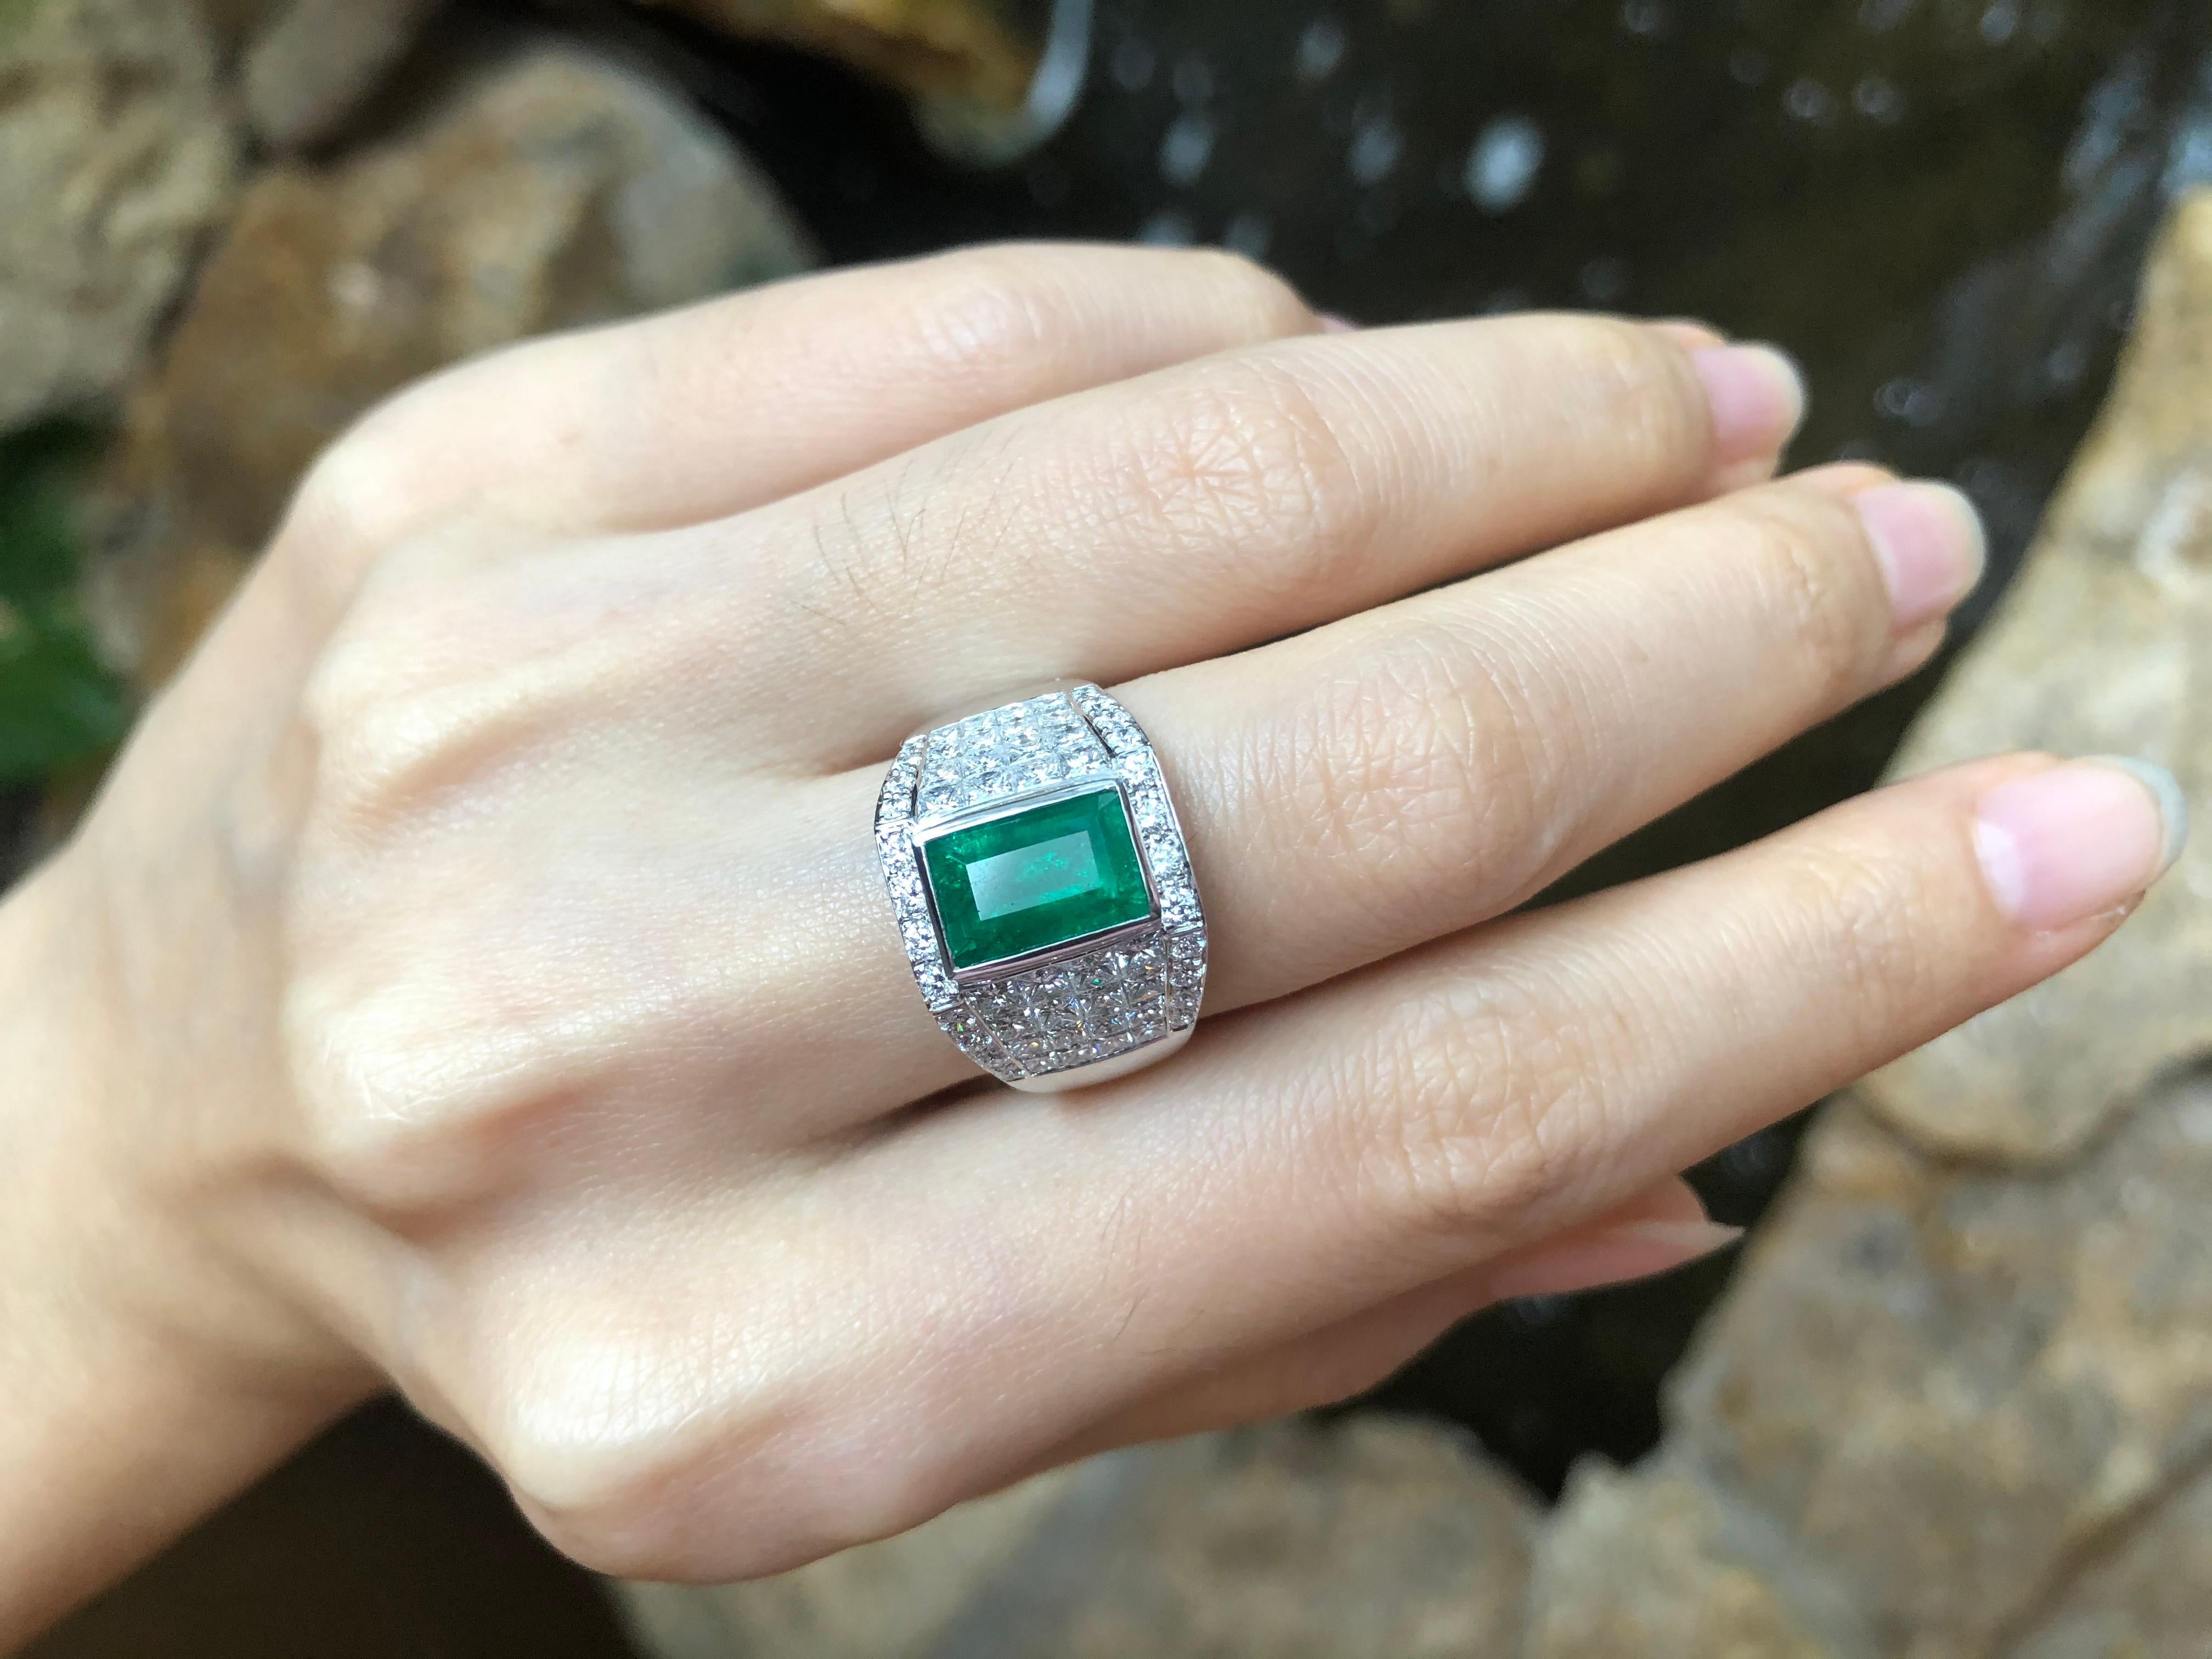 Emerald 1.76 carats with Diamond 2.35 carats Ring set in 18 Karat White Gold Settings

Width:  0.8 cm 
Length: 1.3 cm
Ring Size: 55
Total Weight: 9.94 grams

